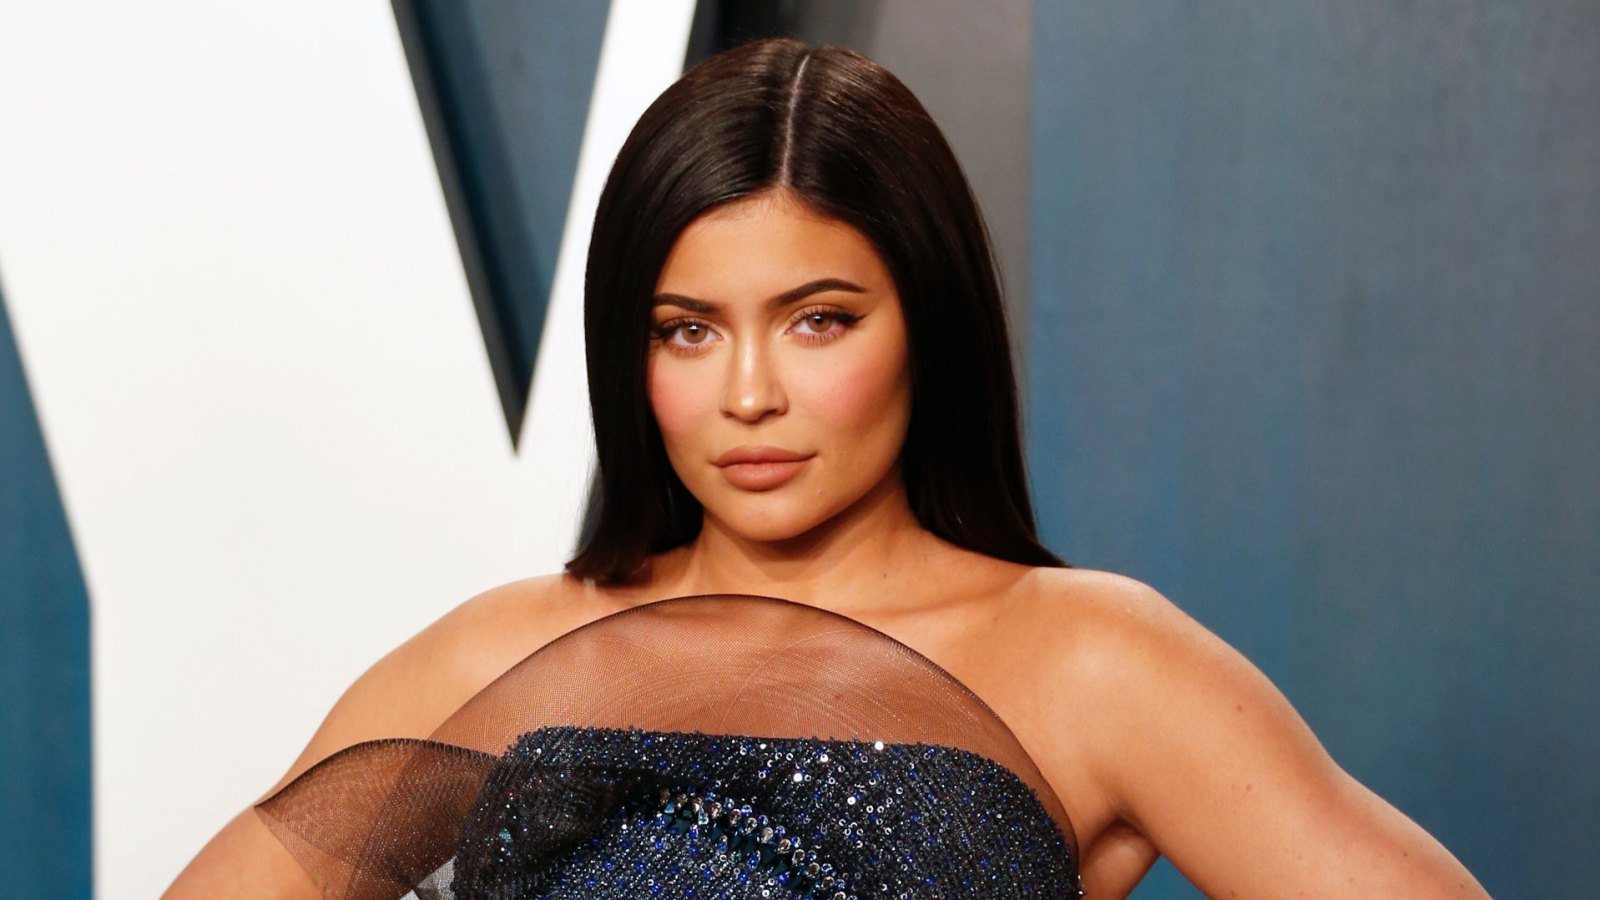 Kylie Jenner attends the 2020 Vanity Fair Oscar Party following the 92nd annual Academy Awards ceremony, in Beverly Hills, California.